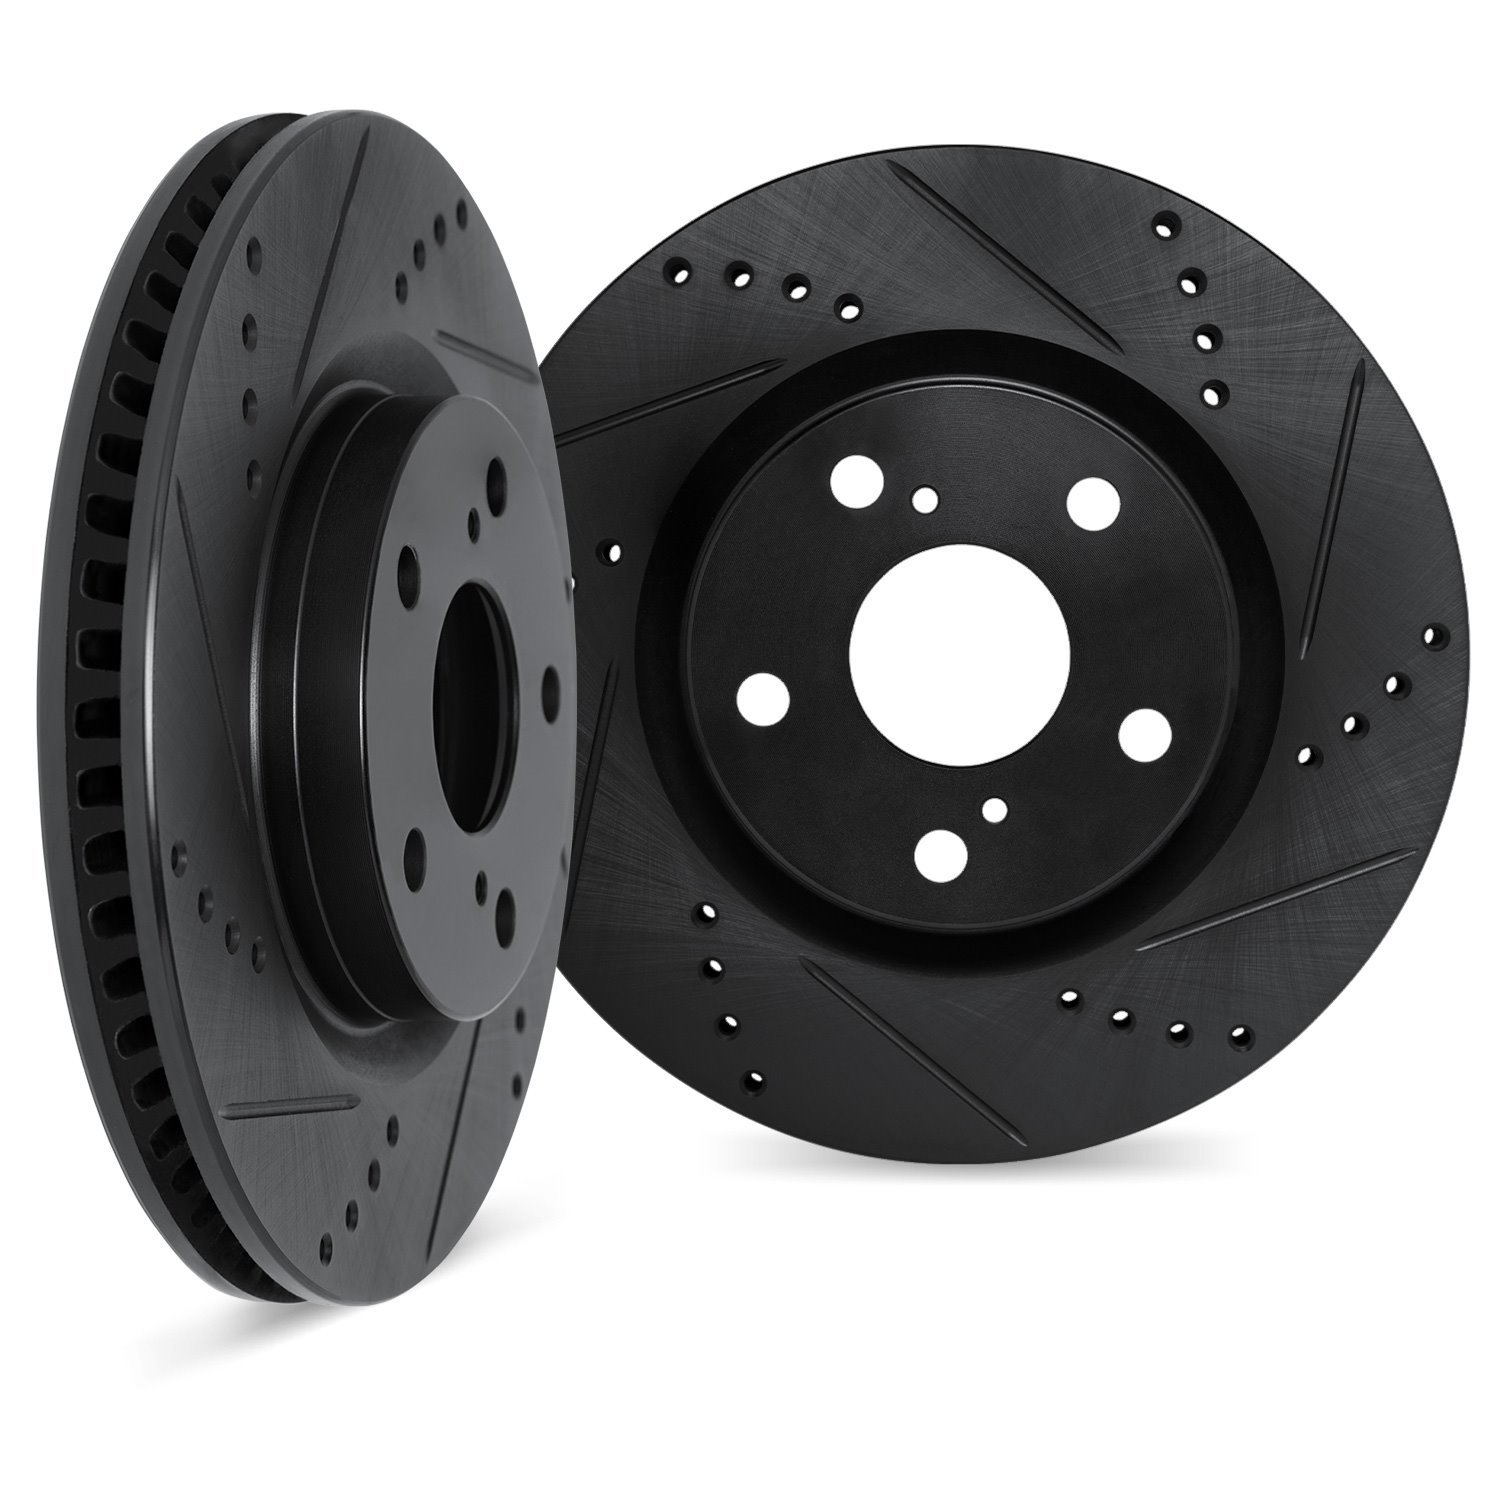 8002-75034 Drilled/Slotted Brake Rotors [Black], Fits Select Lexus/Toyota/Scion, Position: Rear